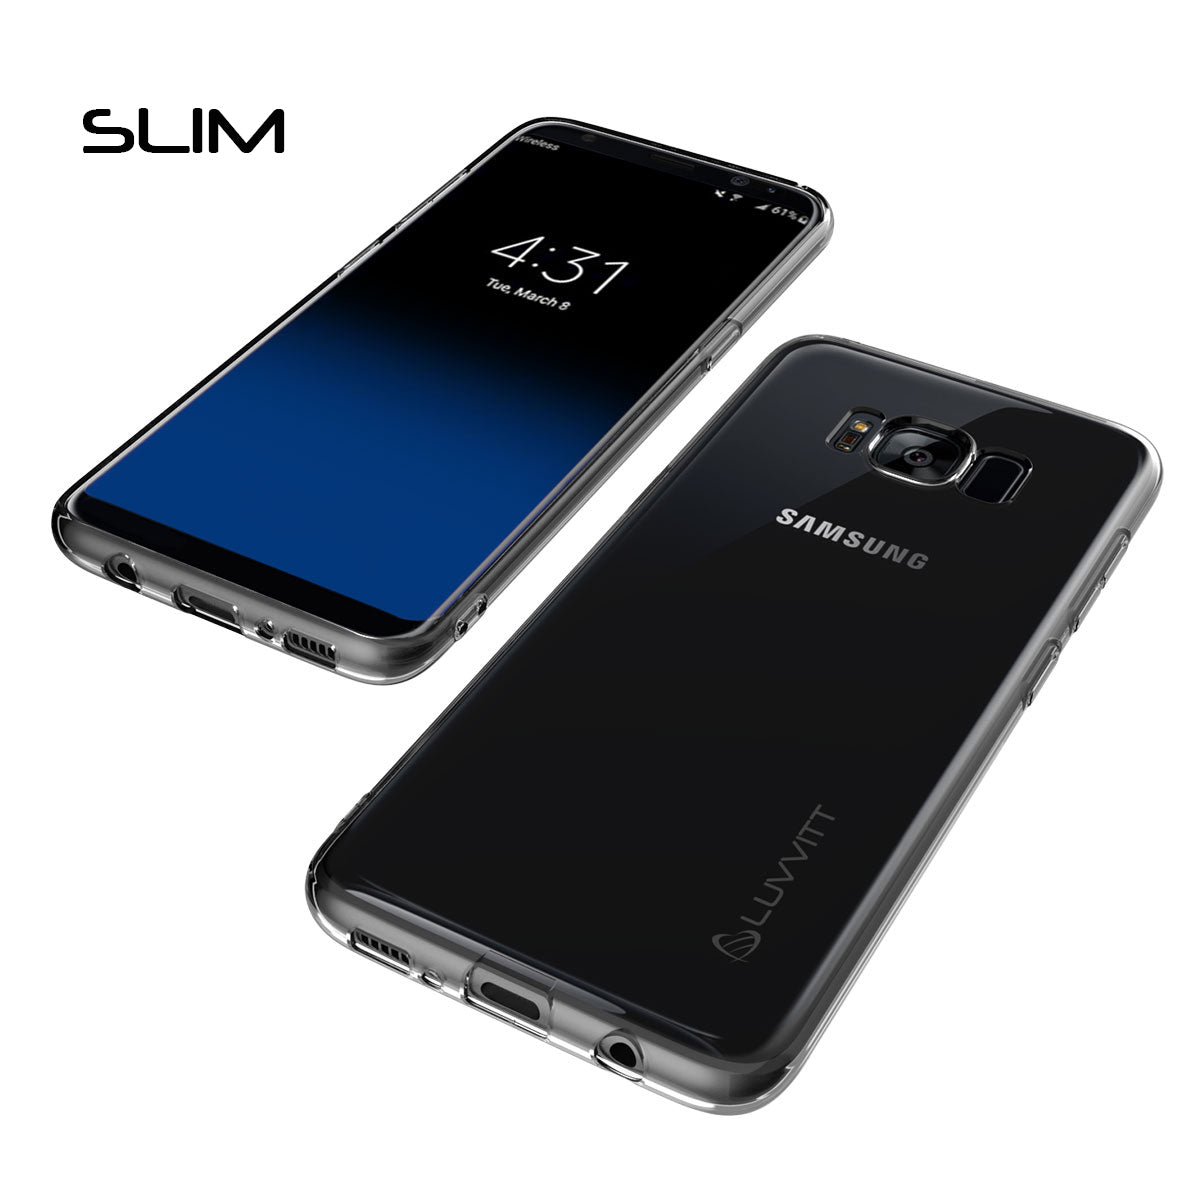 LUVVITT CLARITY Case for Galaxy S8 Plus - Clear